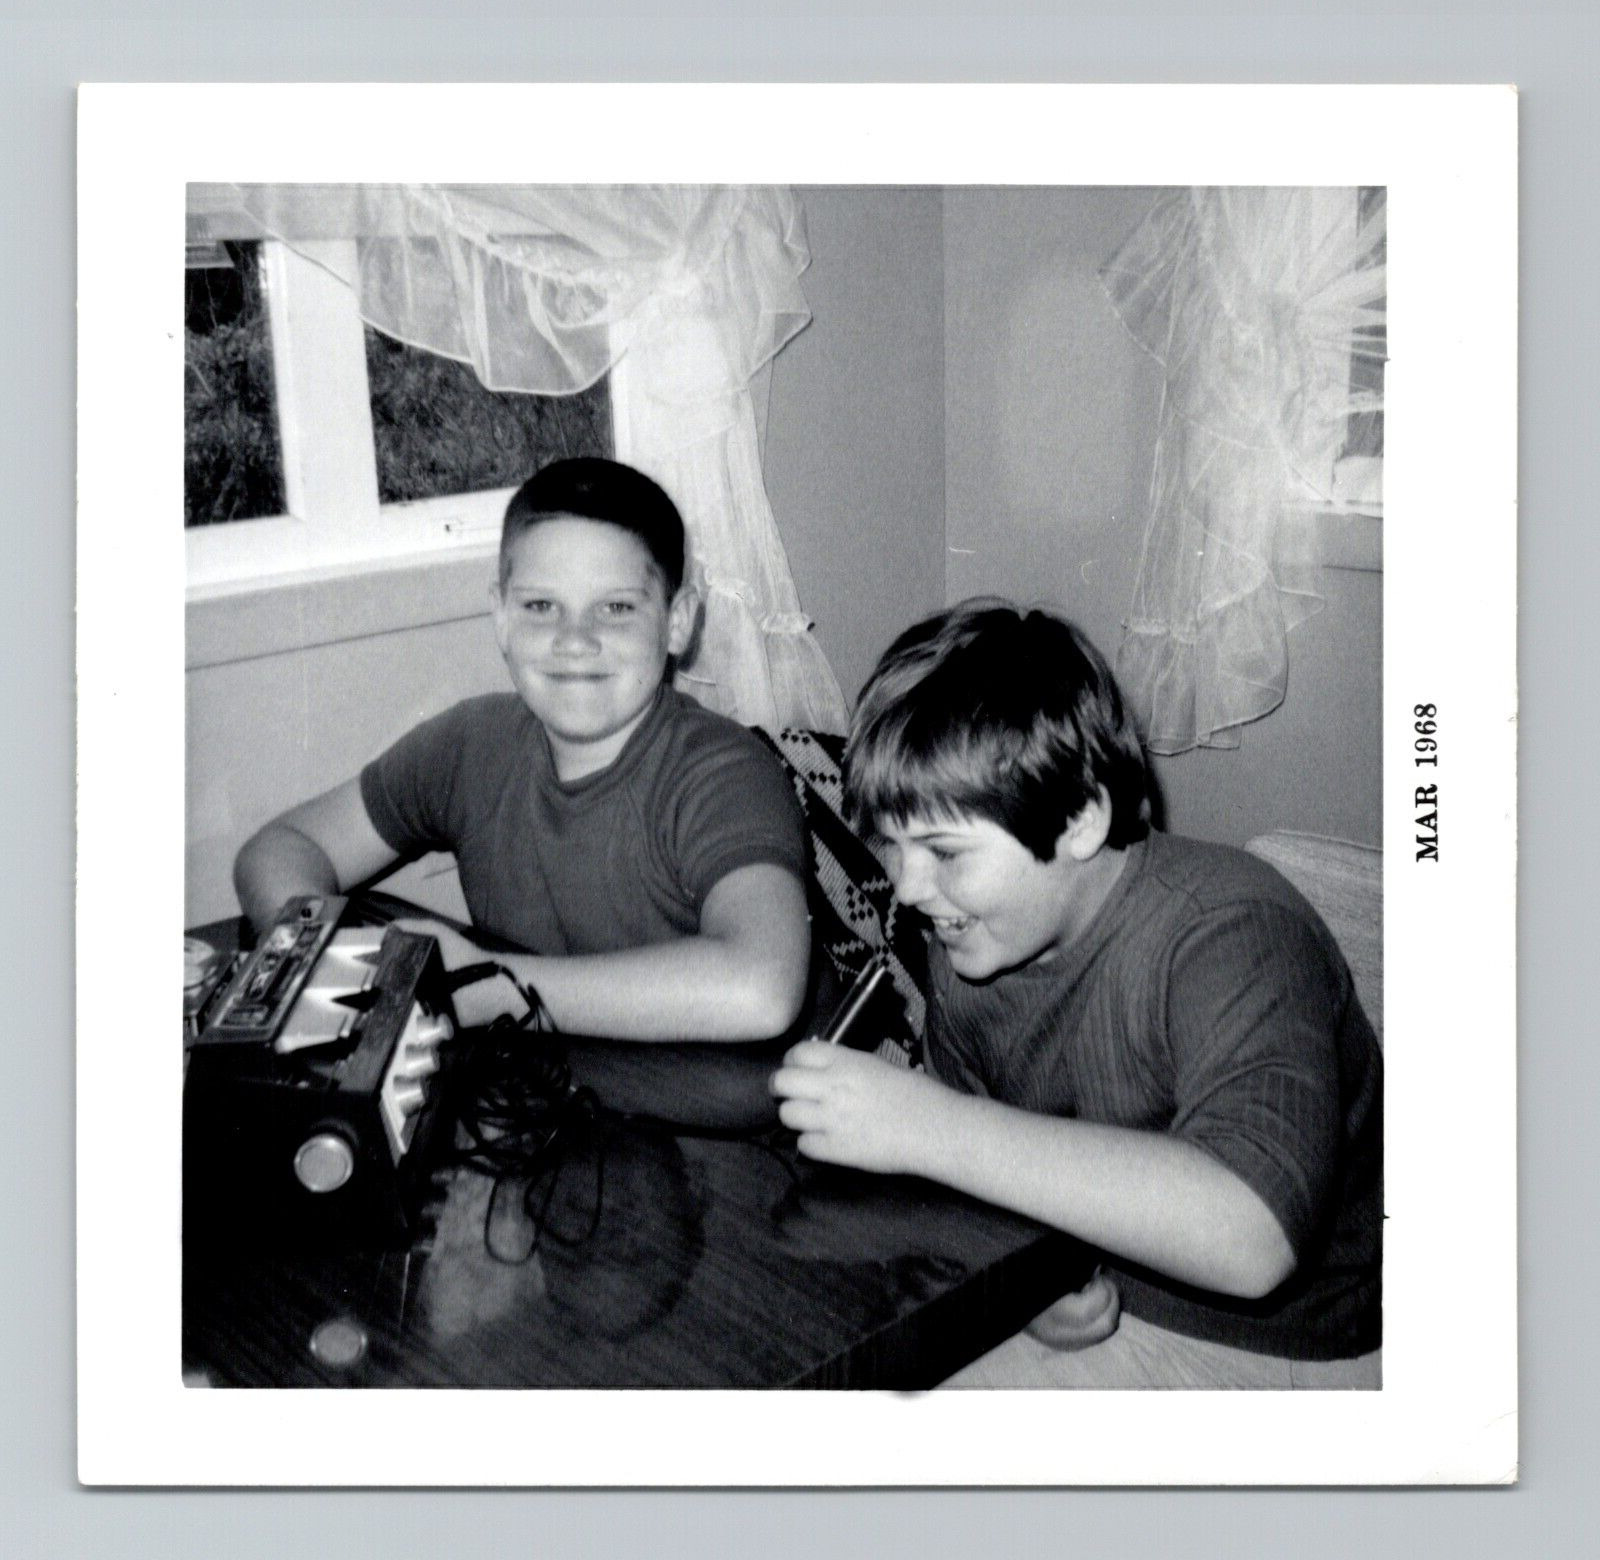 Vintage 60s Photo - Two Young Boys With Reel to Reel Recorder B&W Snapshot